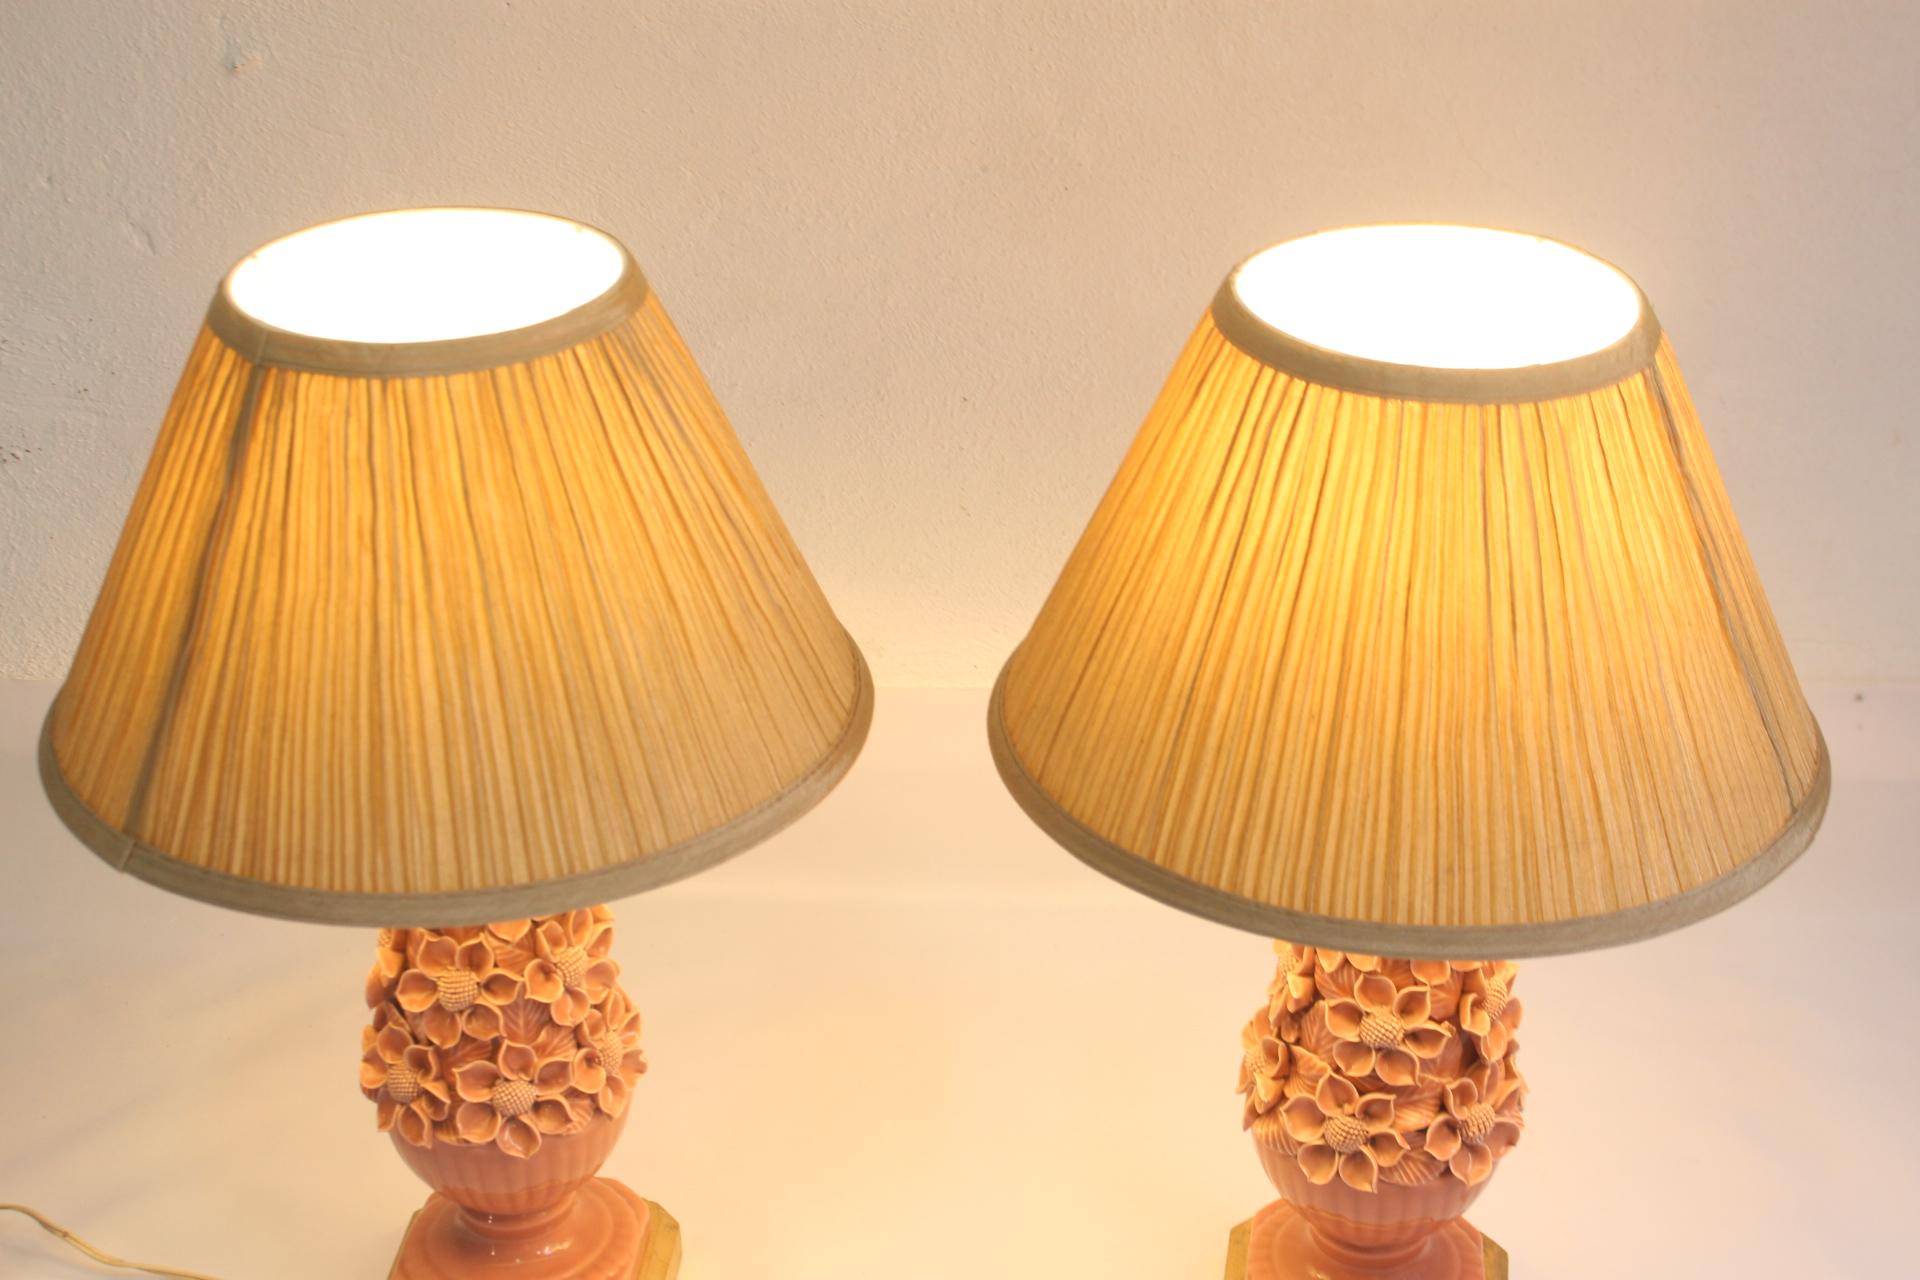 Set of 2 Ceramic Manises Flower Table Lamps in Salmon Color, 1950s For Sale 3